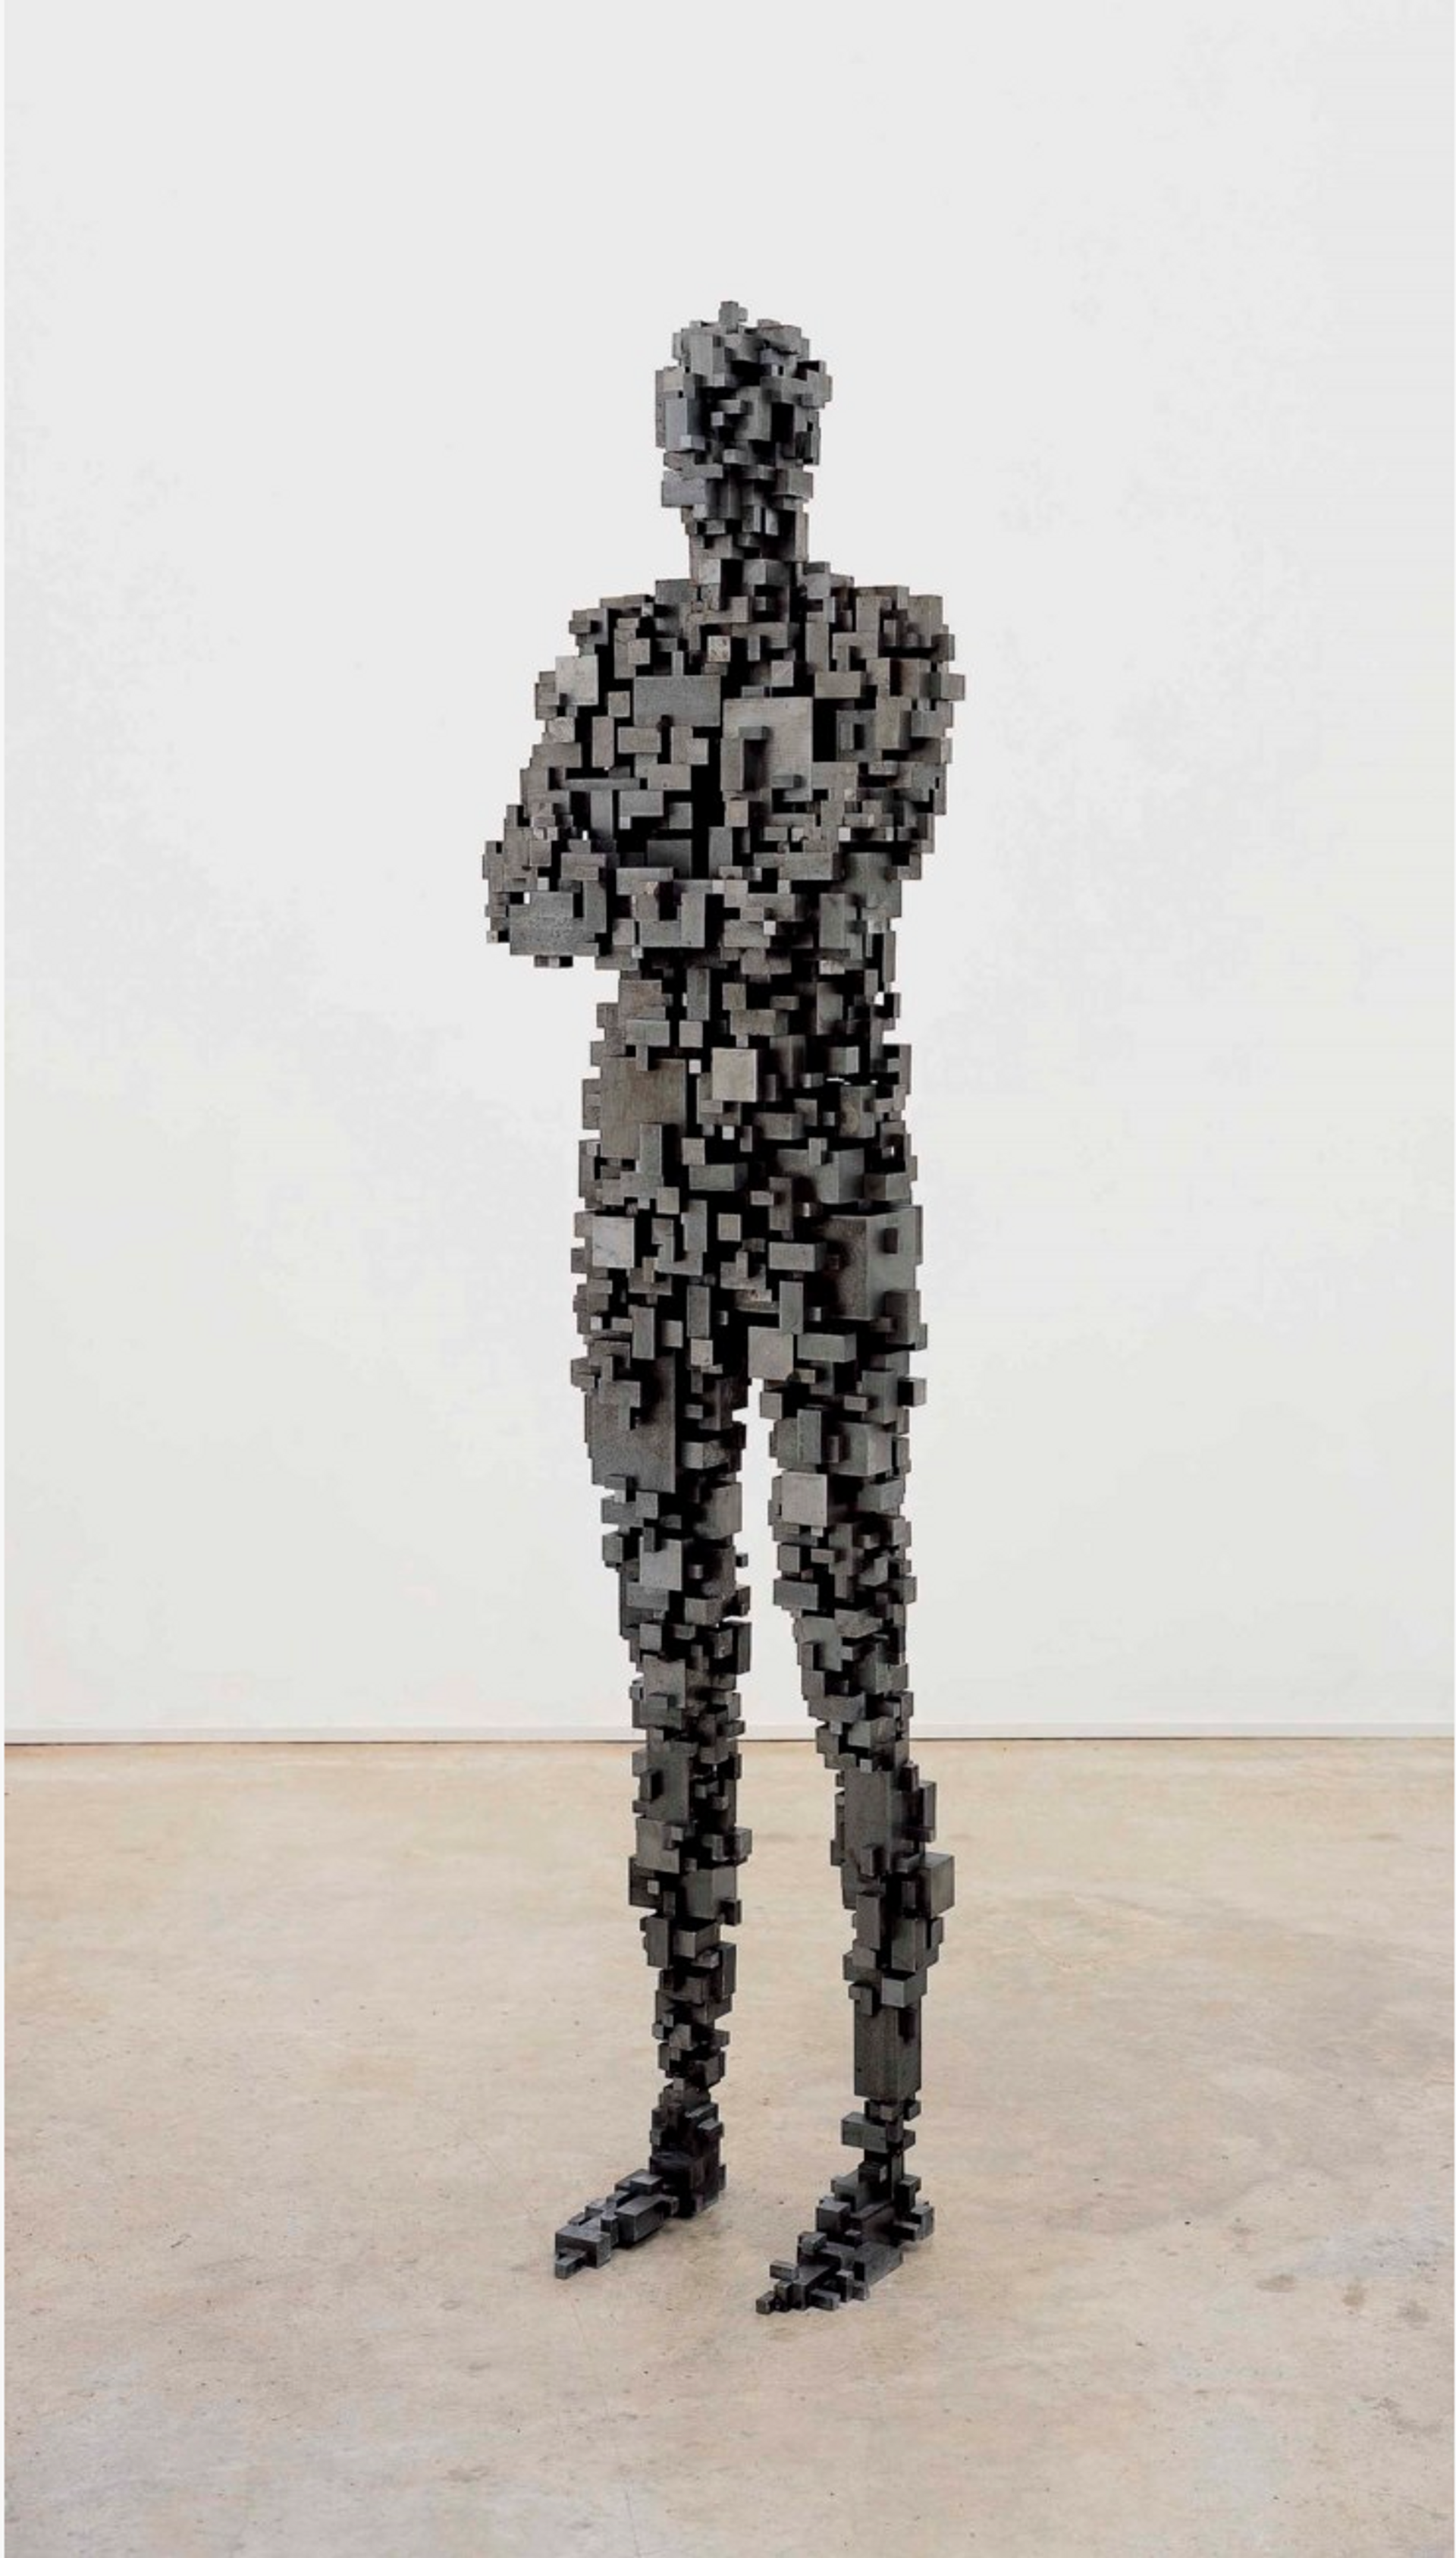 A life-sized human sculpture created using interlocking steel blocks, depicting a figure with feet positioned apart and arms crossed in front of the chest. The sculpture embodies the essence of the human form, devoid of distinctive features. The use of tessellating steel blocks adds an intriguing texture and structure to the sculpture's composition.